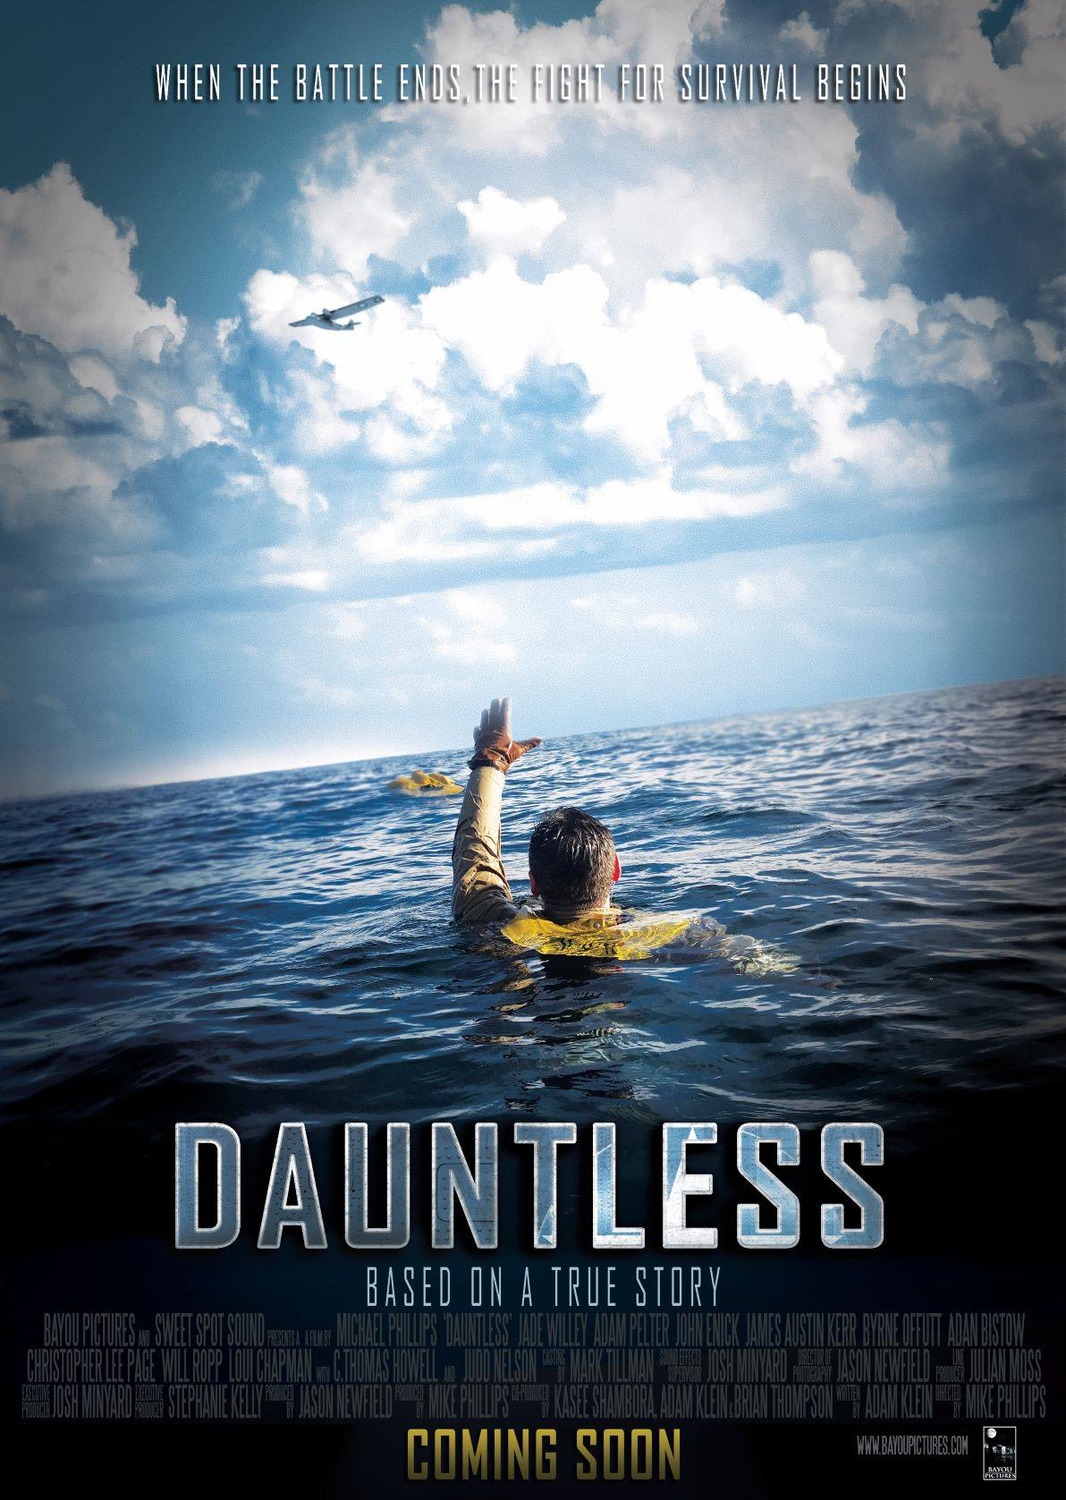 Extra Large Movie Poster Image for Dauntless: The Battle of Midway (#2 of 2)